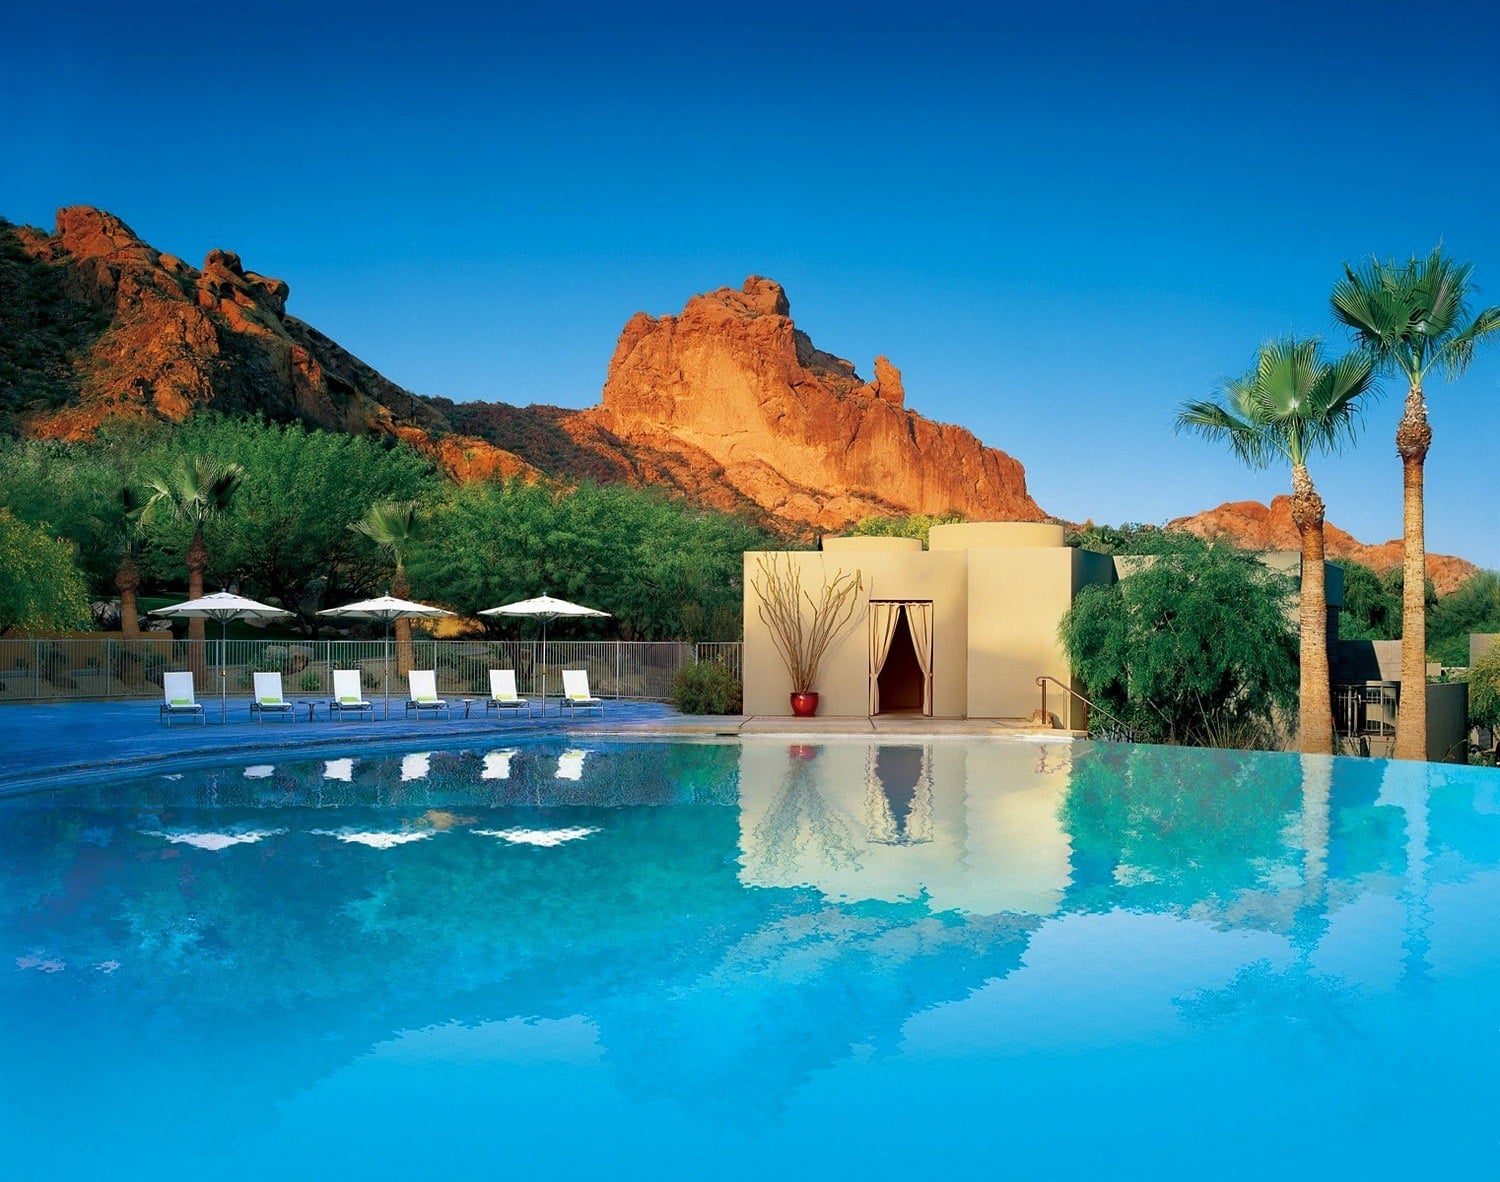 Camelback Mountain Resort & Spa Mother's Day Hotel Package